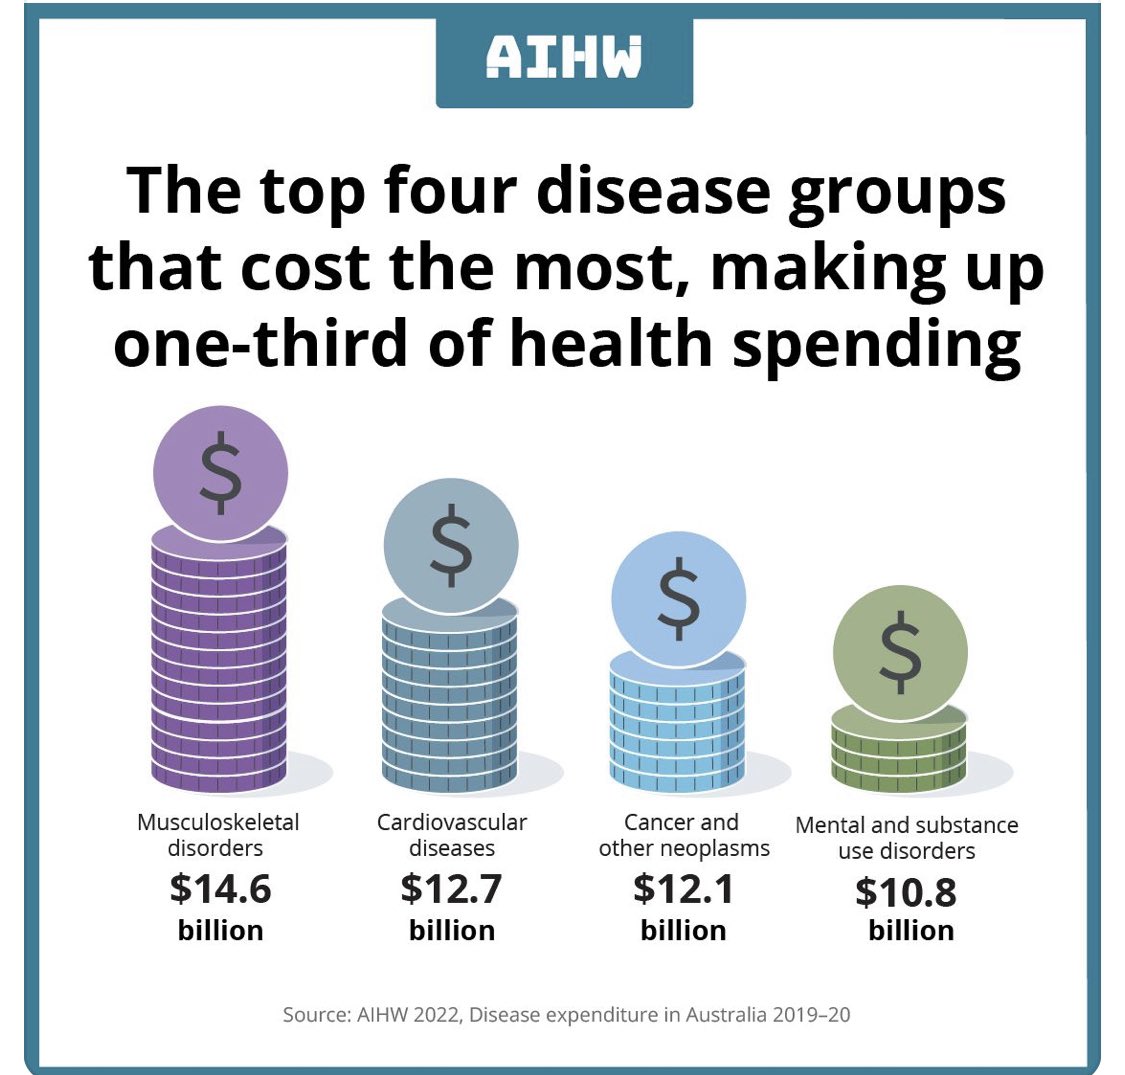 A new AIHW report reveals the top 4 disease groups that cost the most, making up one-third of health spending. Highlights the need for less low value care and more high value care. See more: fal.cn/3u6ha